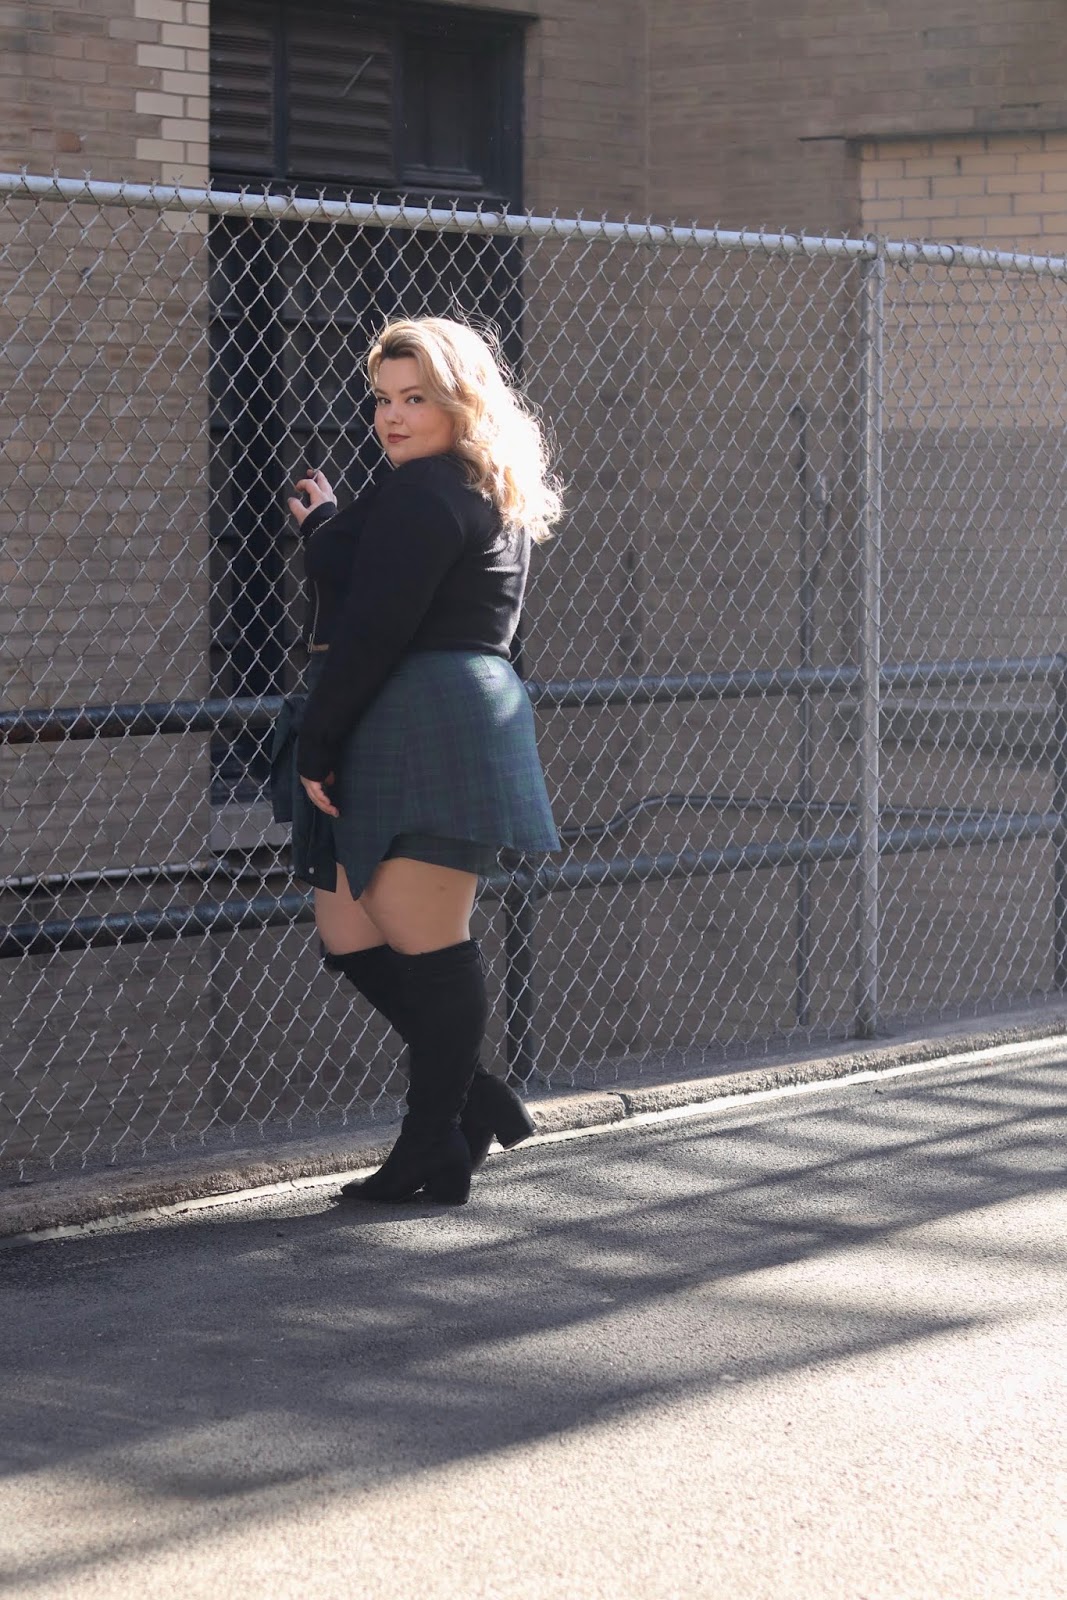 Chicago Plus Size Petite Fashion Blogger and model Natalie Craig reviews Soncy's Not Your Average Plaid Skirt and The Zip It Up Lightweight Sweater.